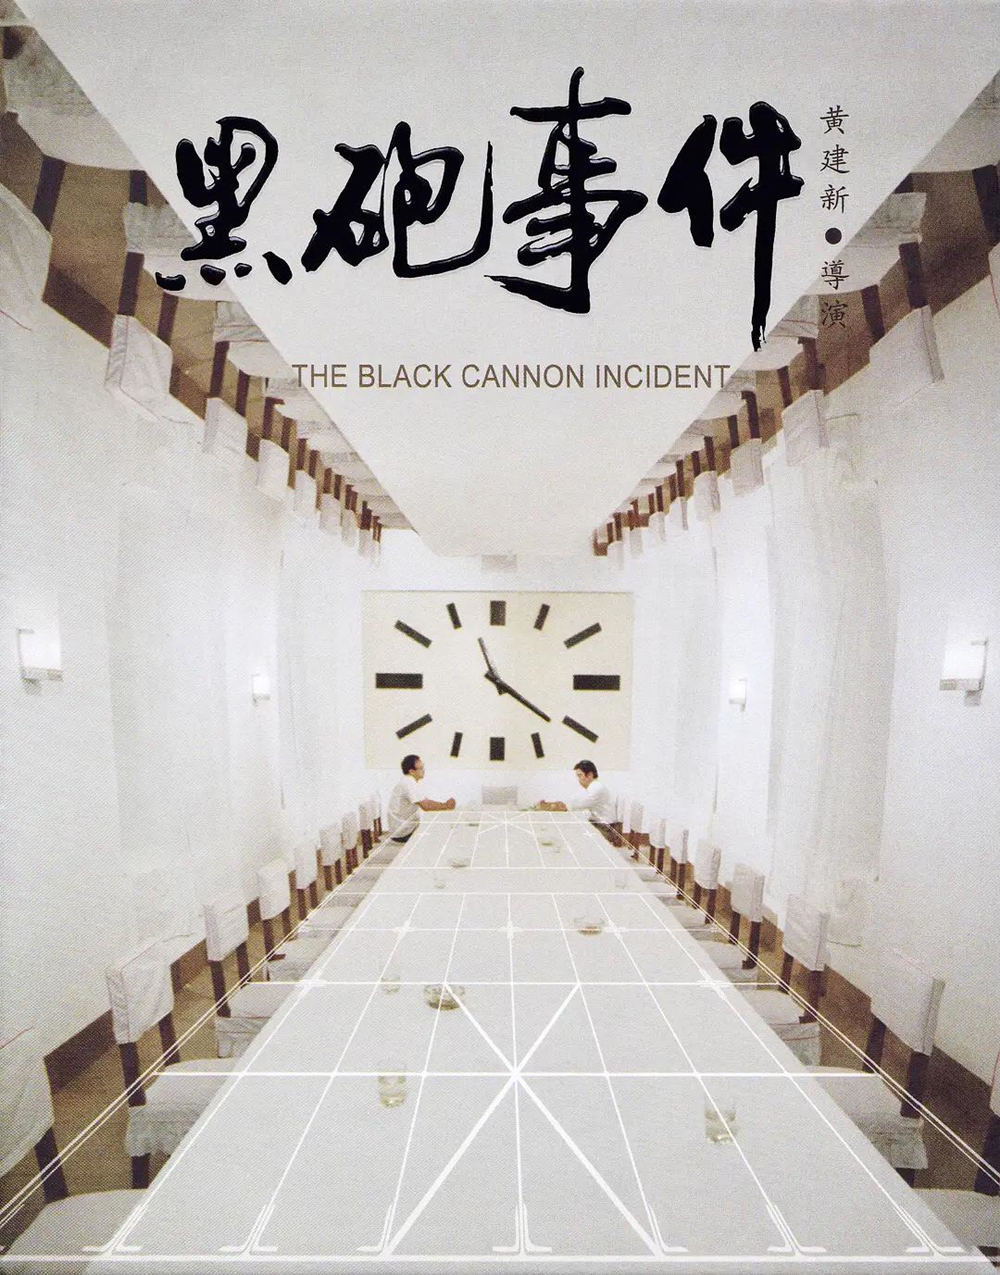 "Black Cannon Incident" poster